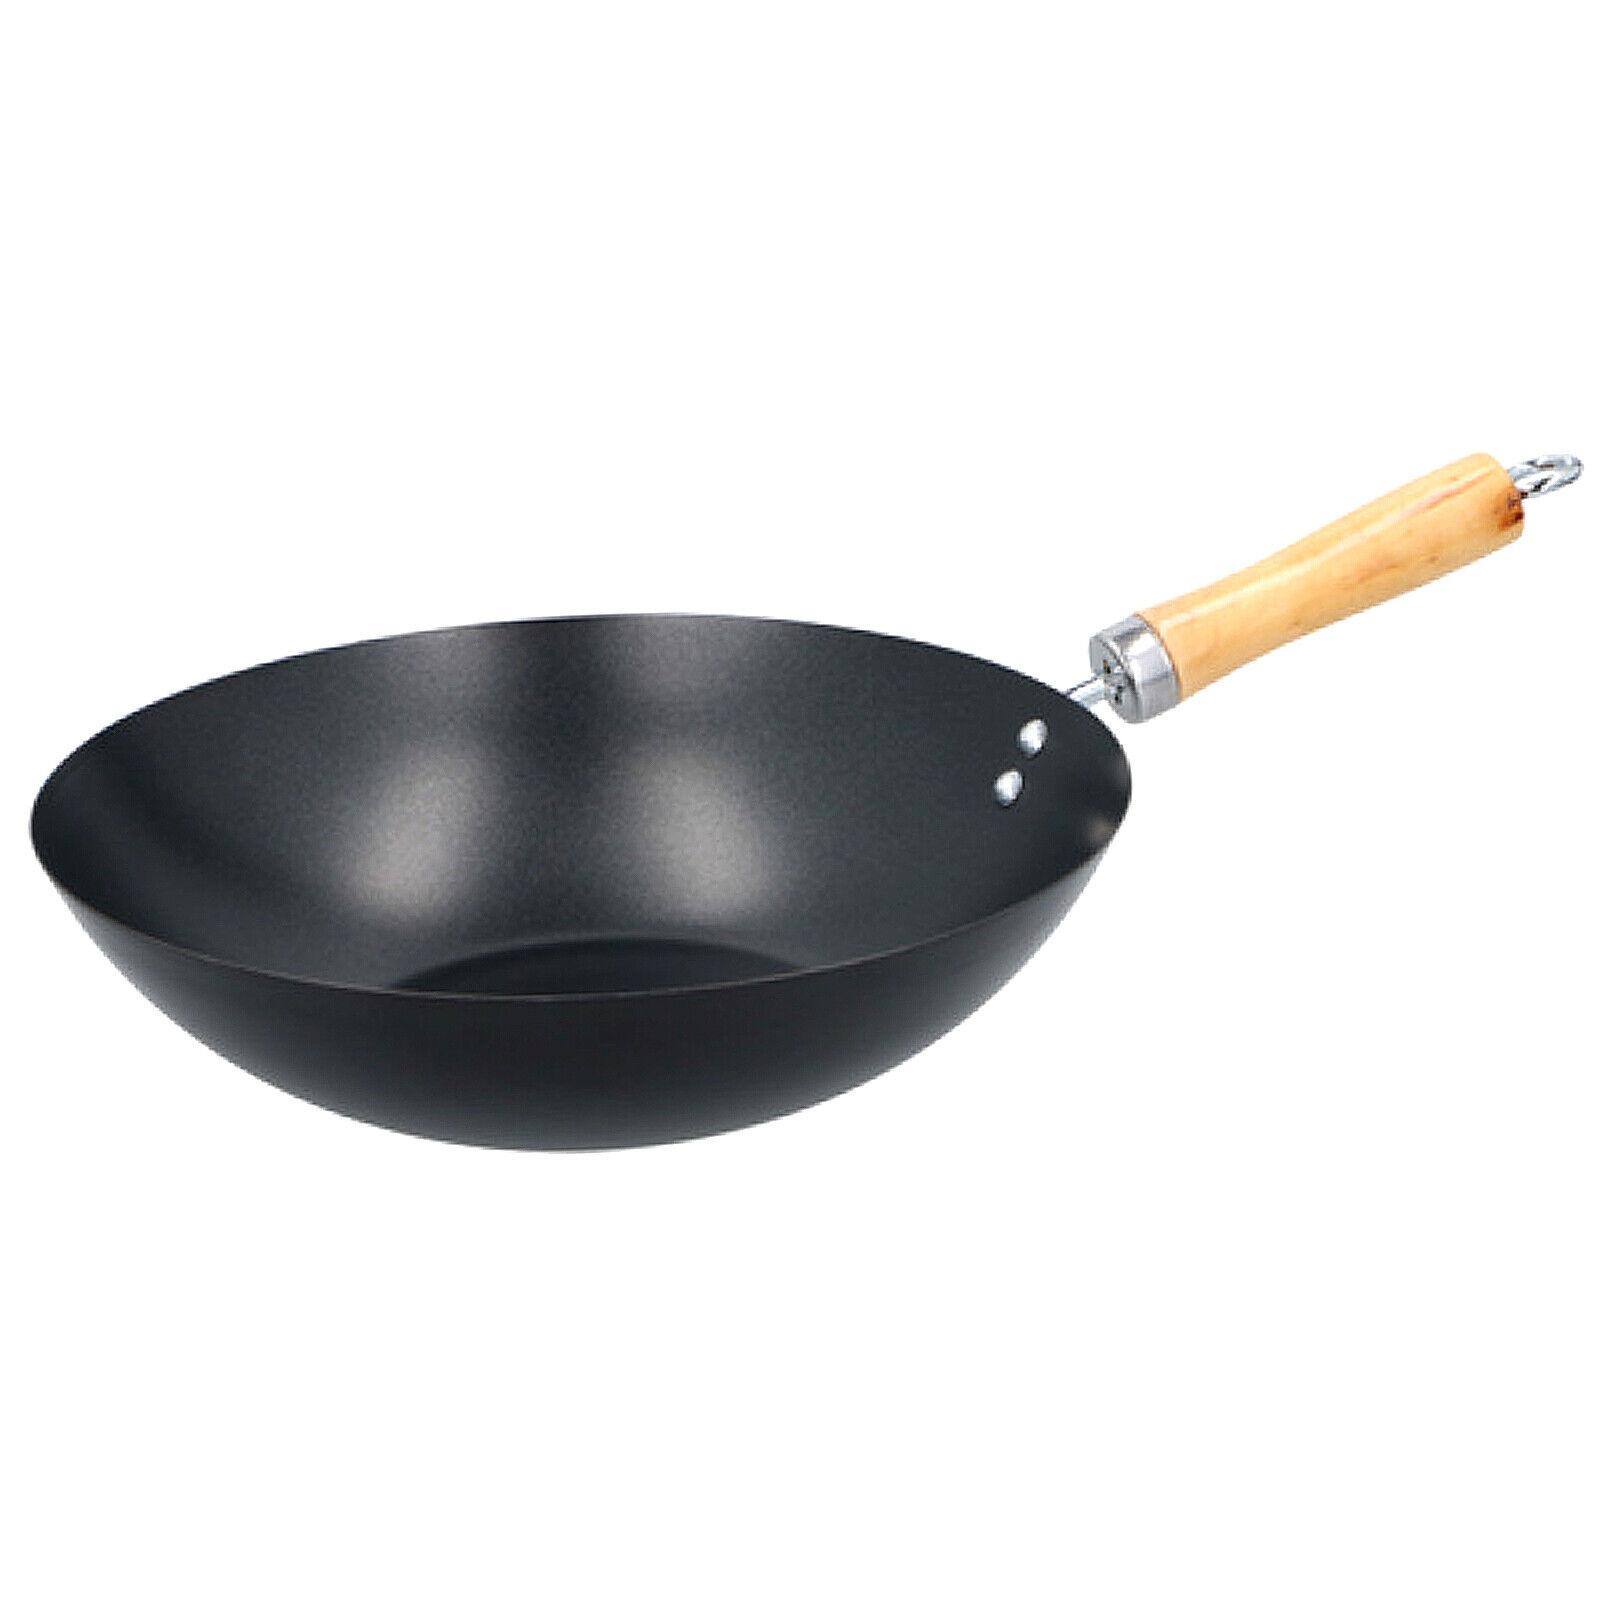 30cm Traditional Chinese Wok Carbon Steel Wooden Handle Stir Fry Pan Hob Cooking 